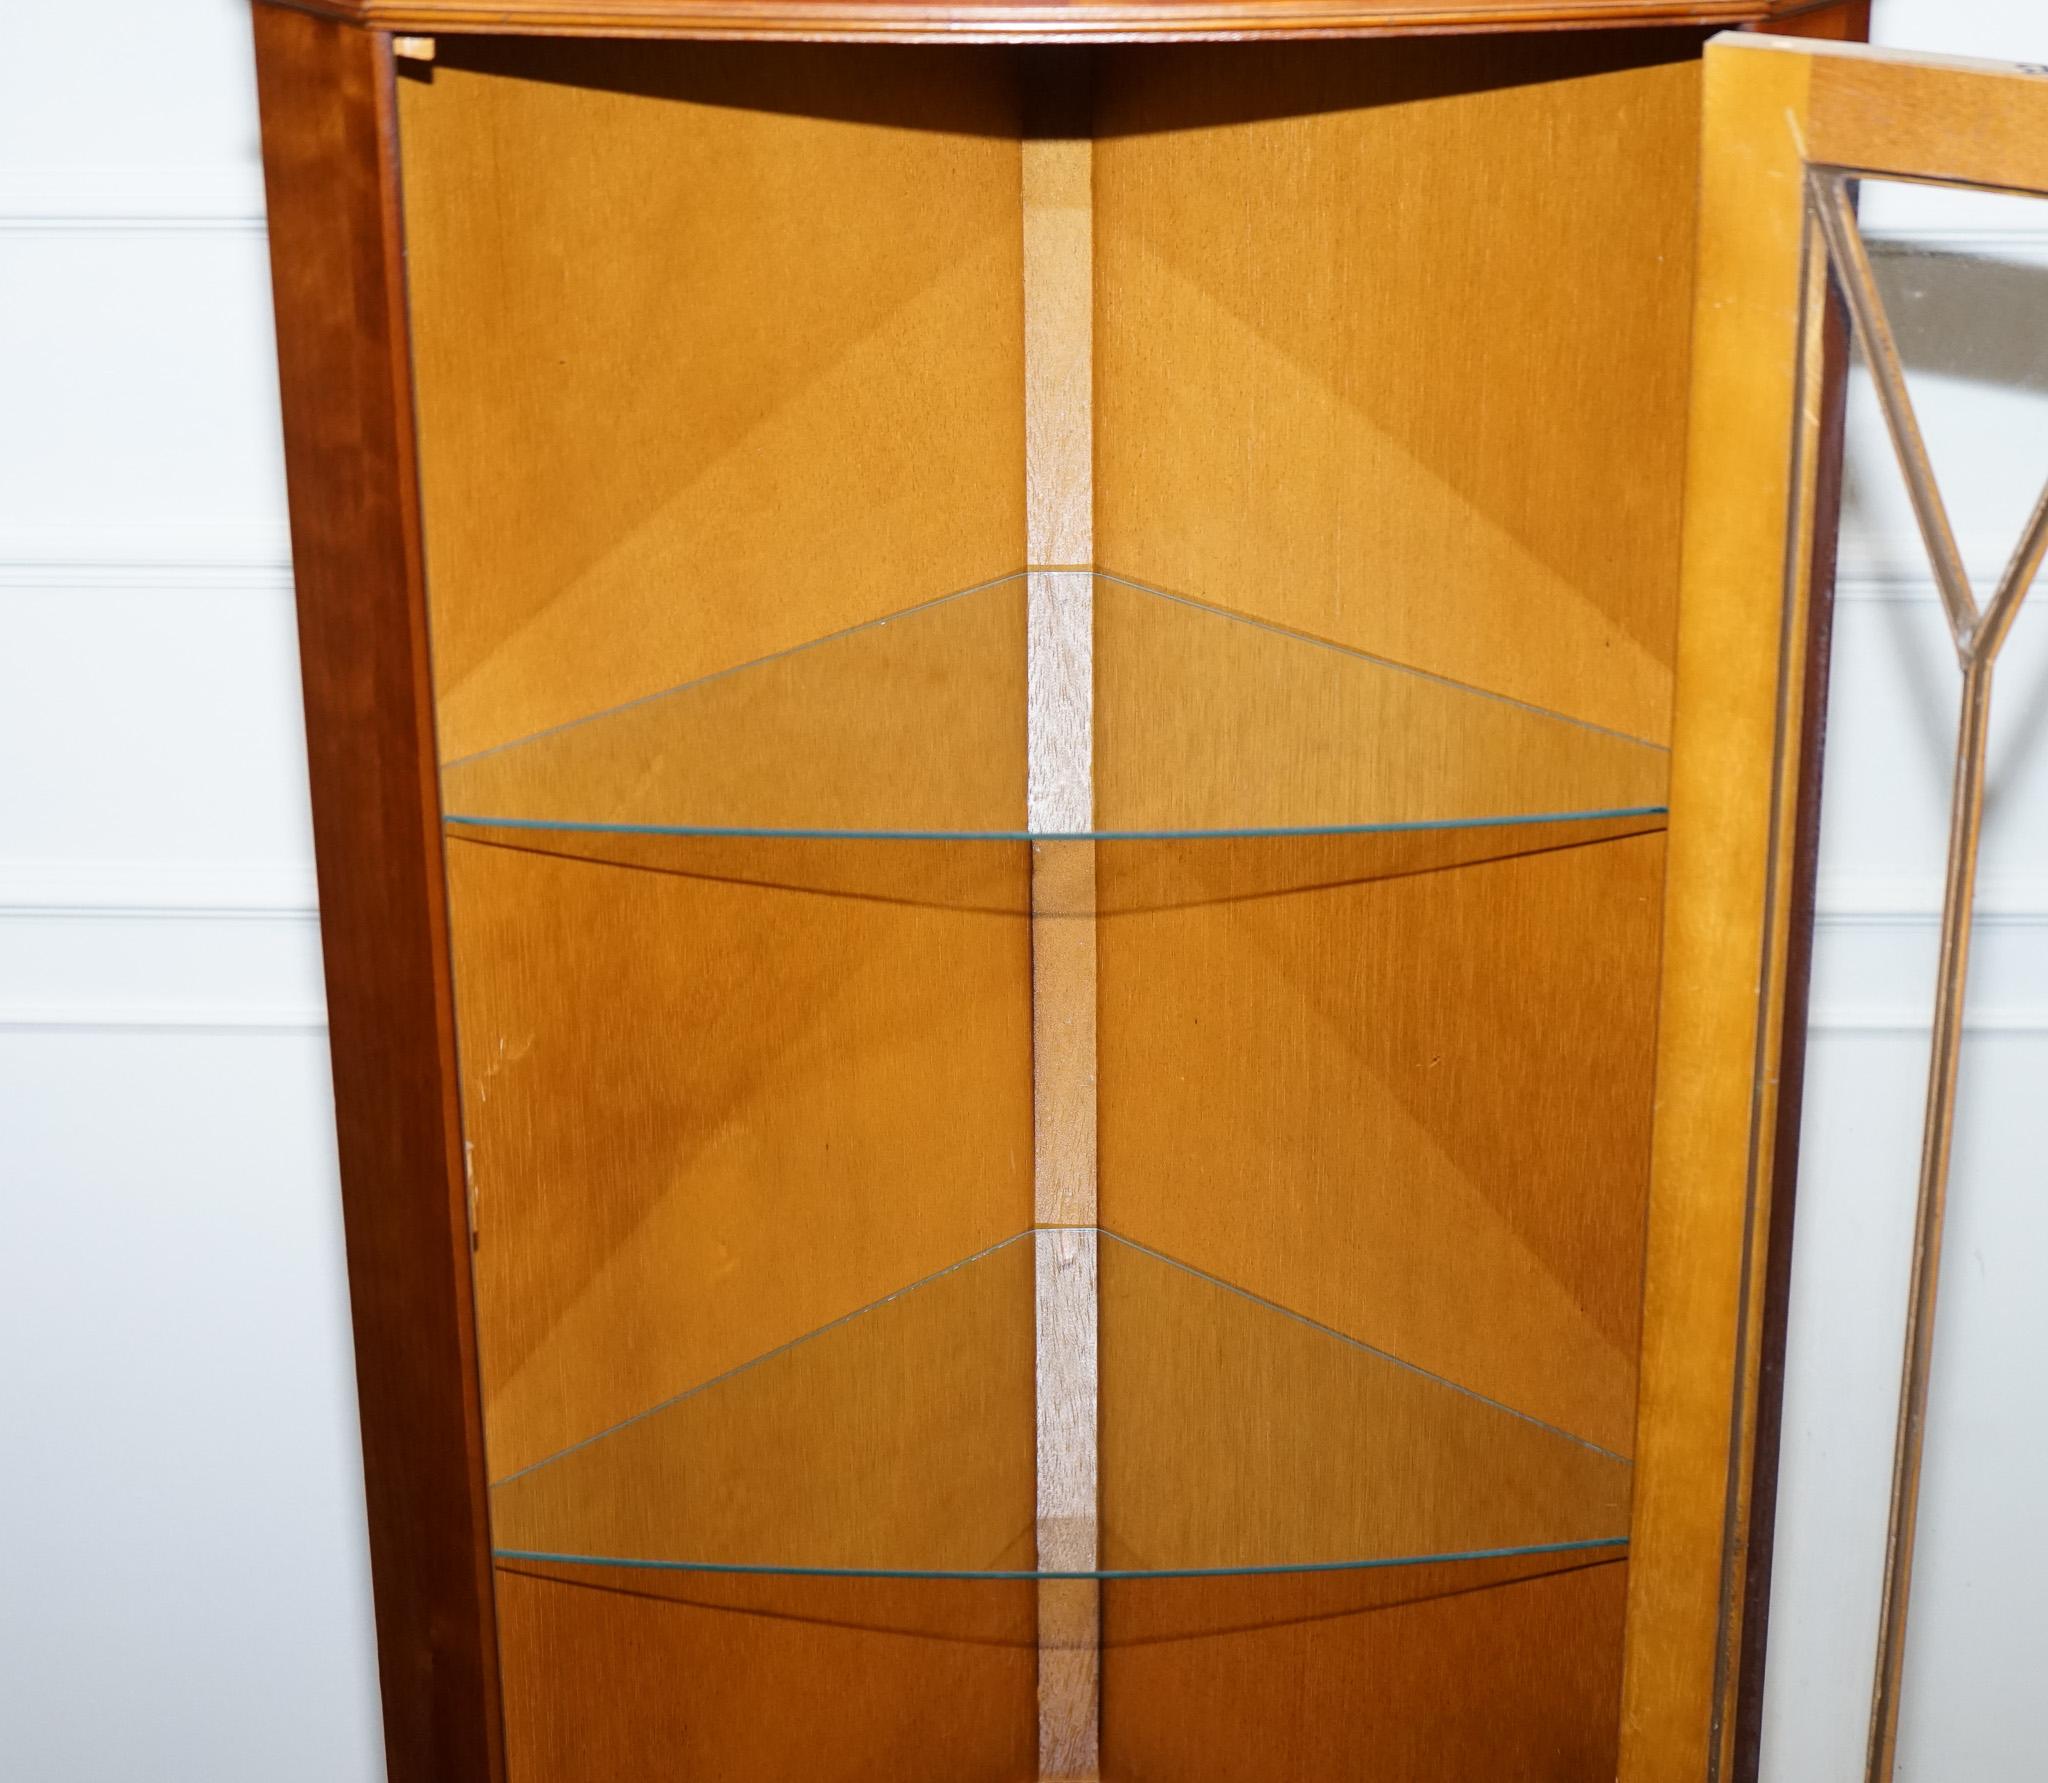 Vintage English Yew Wood Corner Cabinet Cupboard In Good Condition For Sale In Pulborough, GB